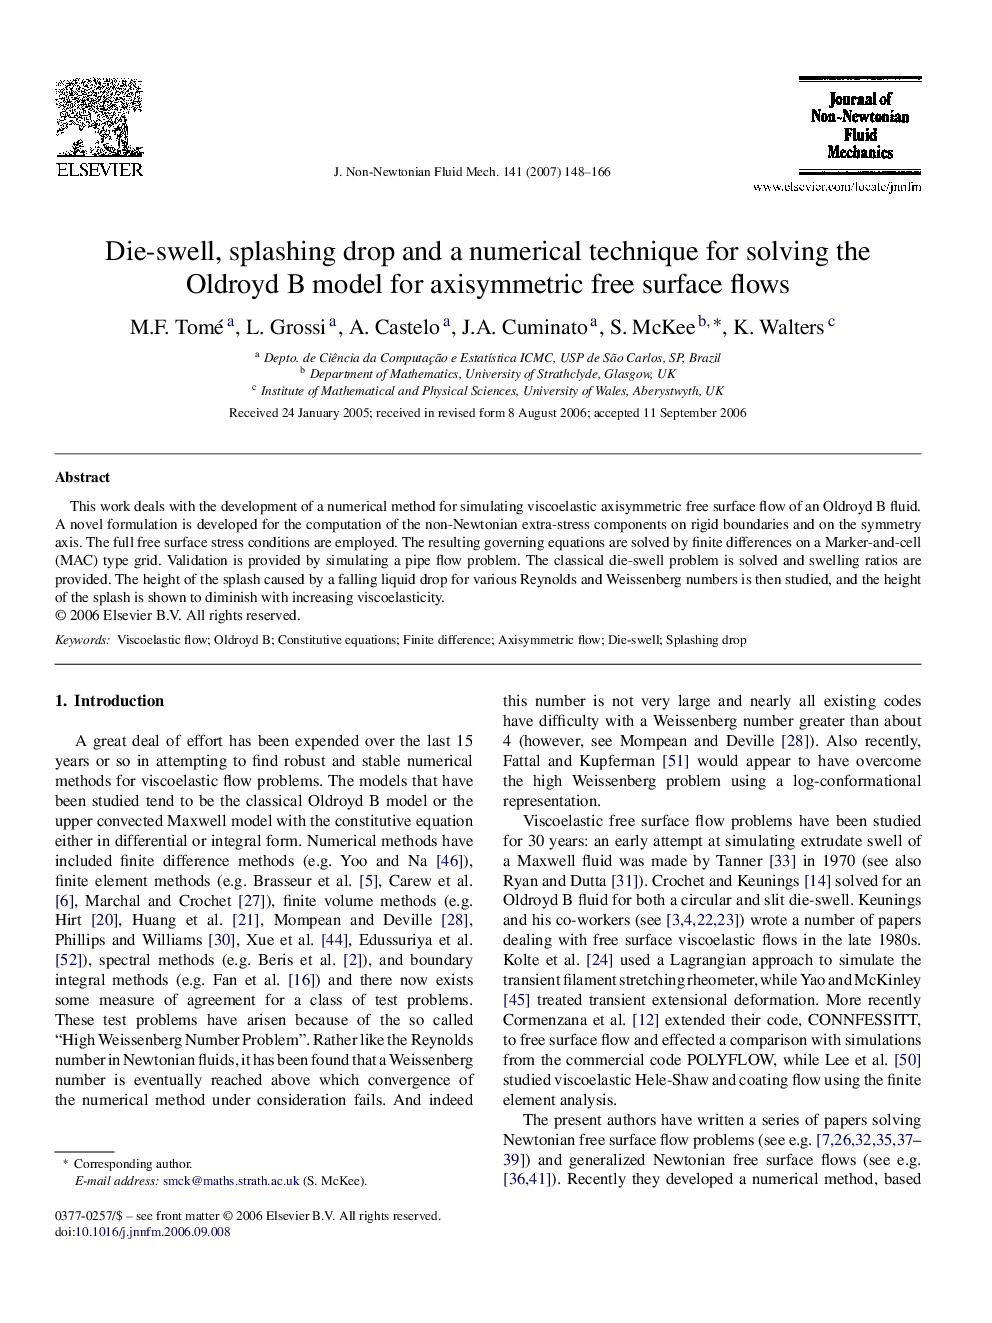 Die-swell, splashing drop and a numerical technique for solving the Oldroyd B model for axisymmetric free surface flows